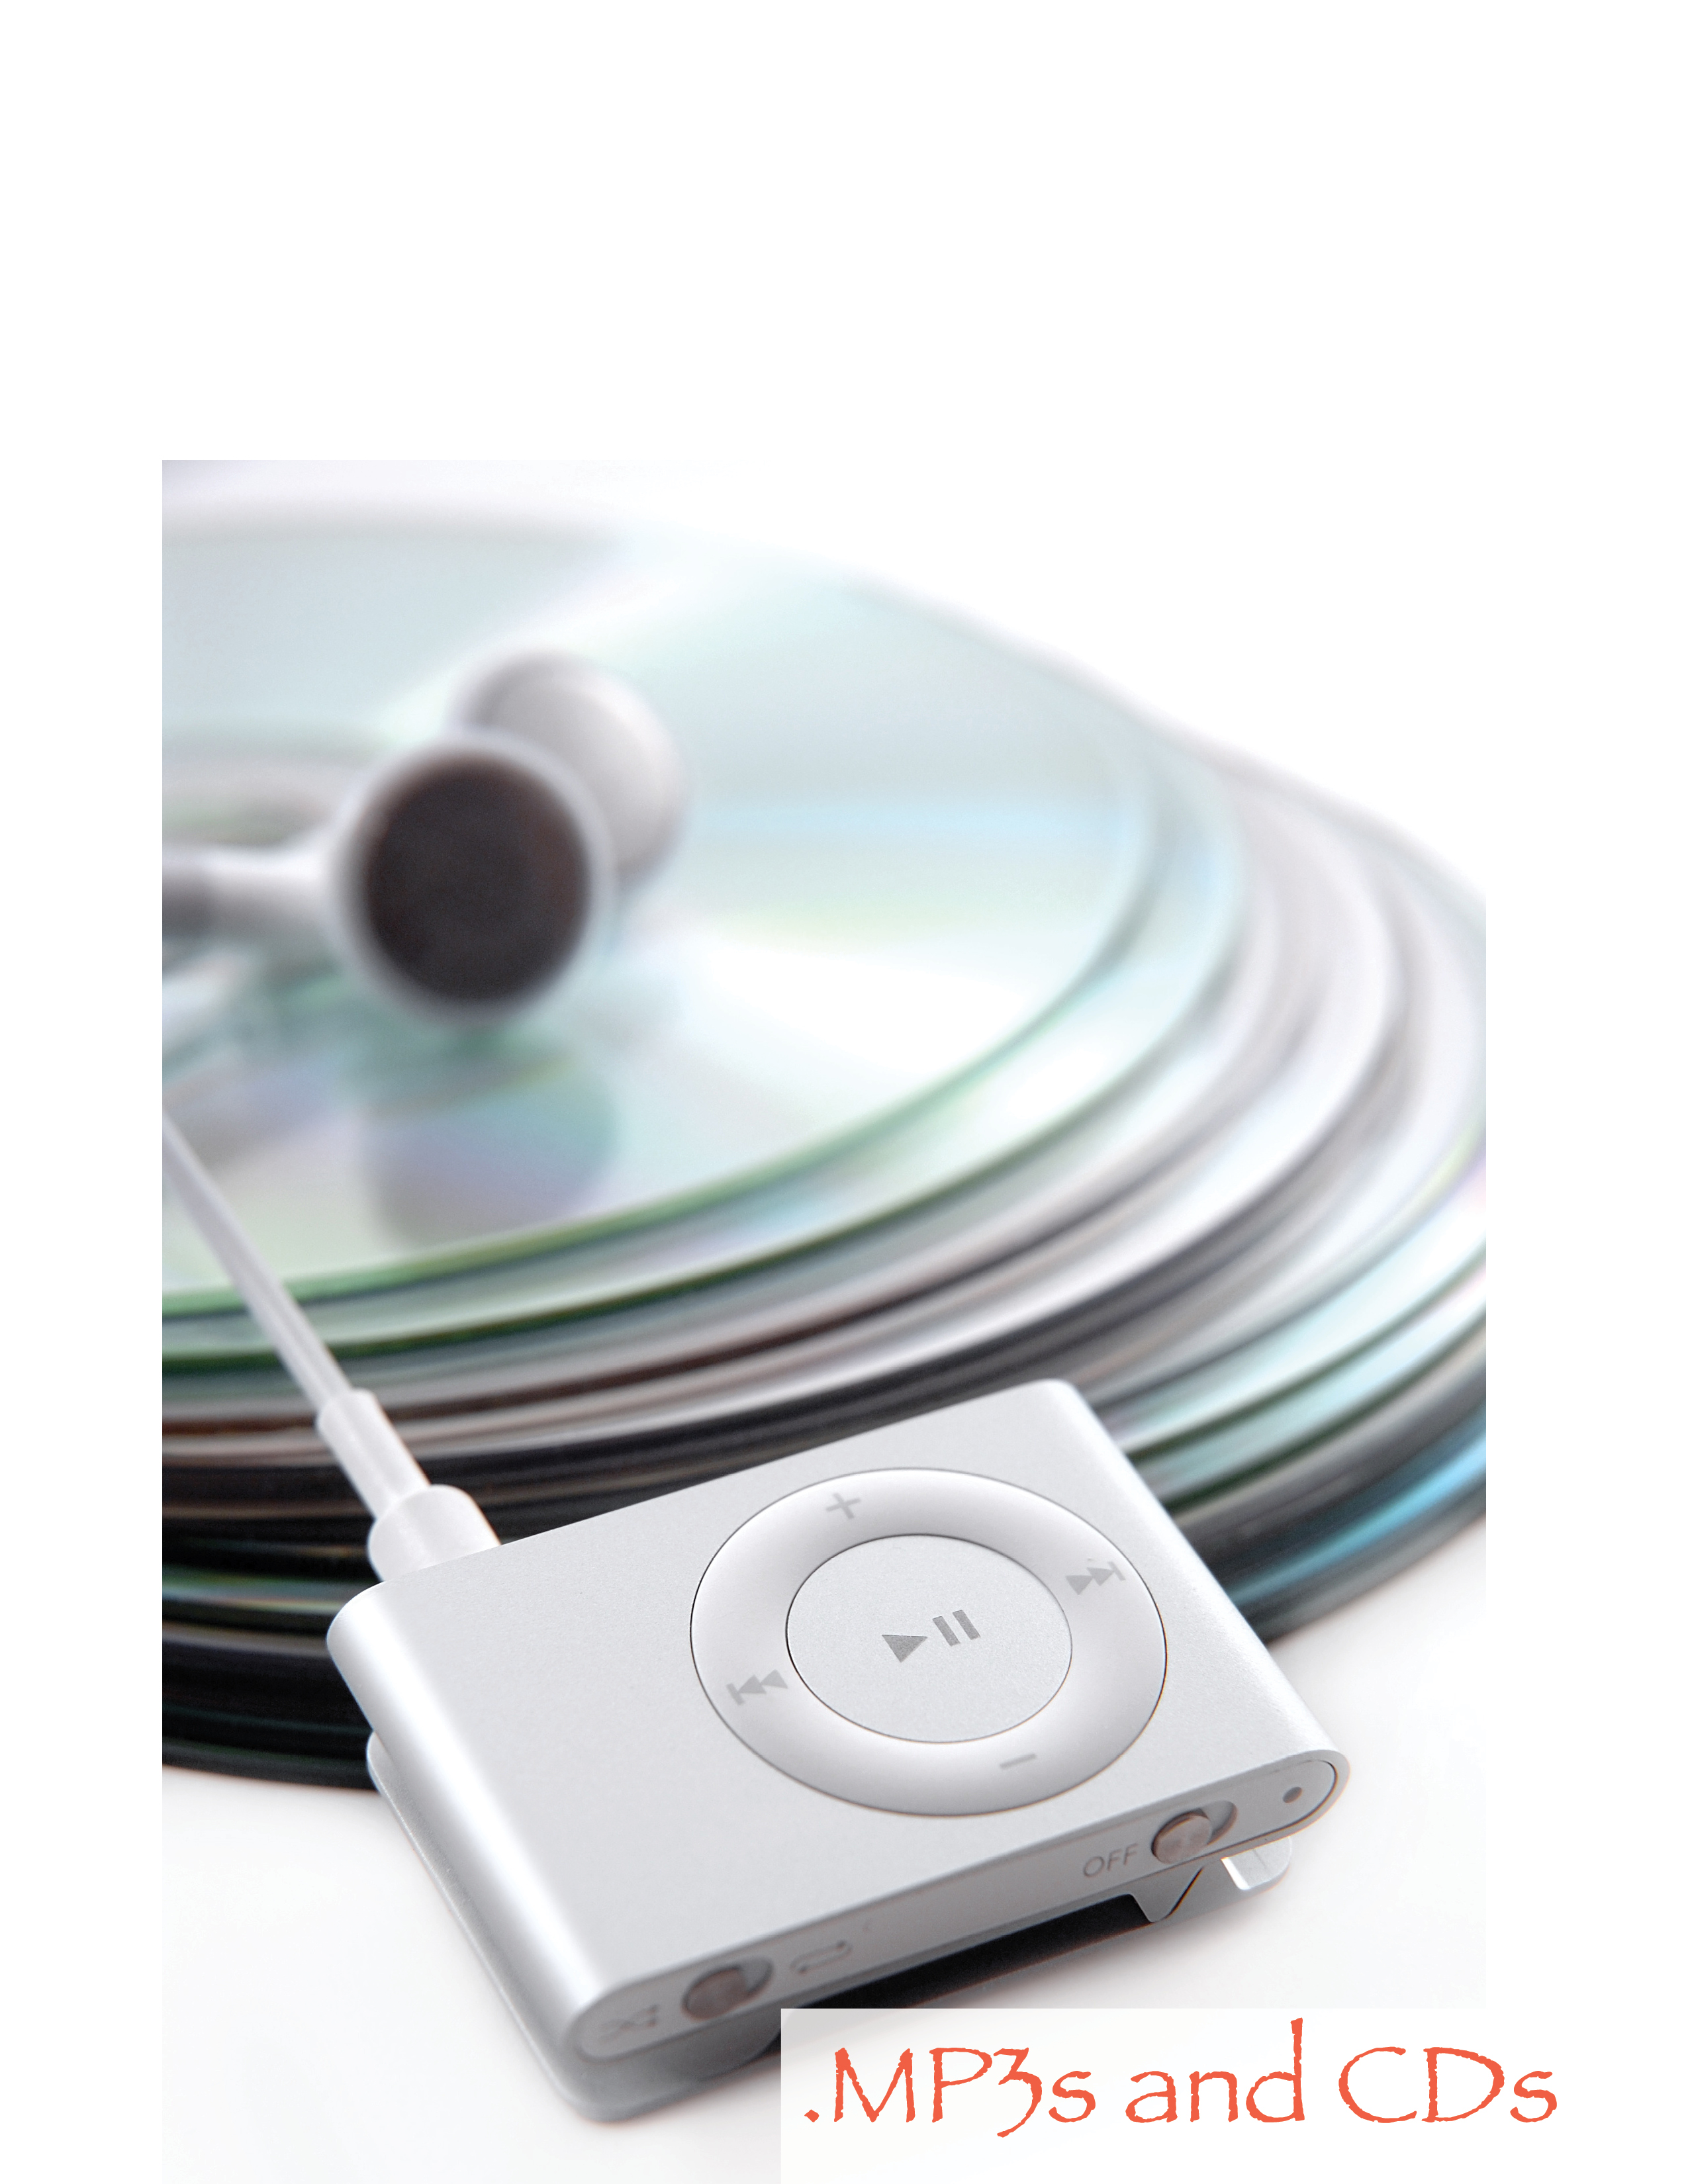 MP3's and CD's